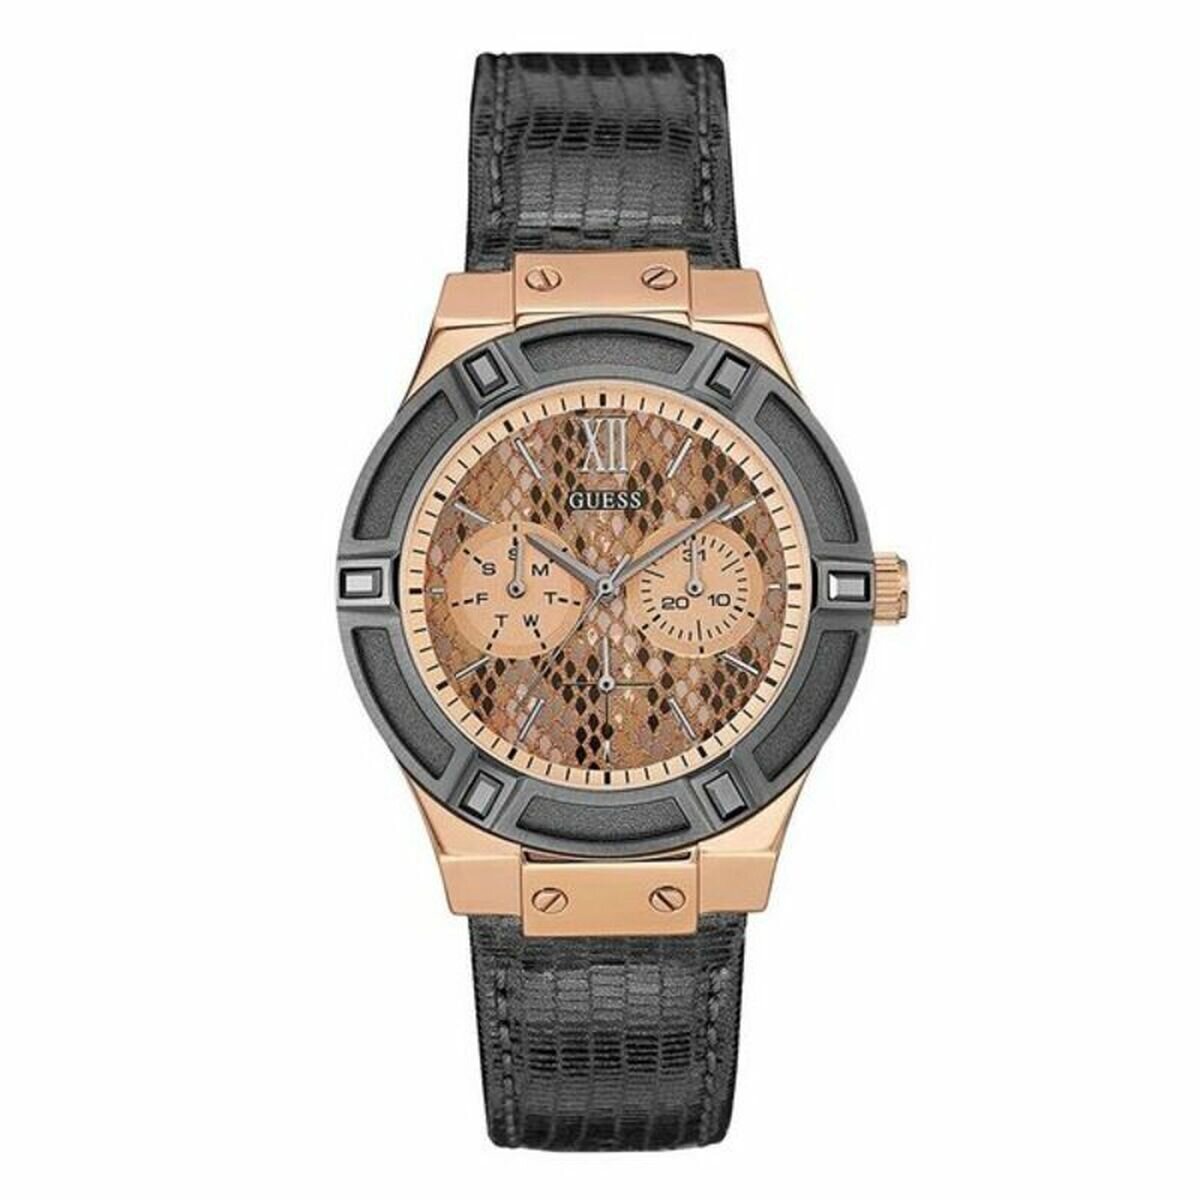 Ladies Guess Jet Setter​ Watch in gray